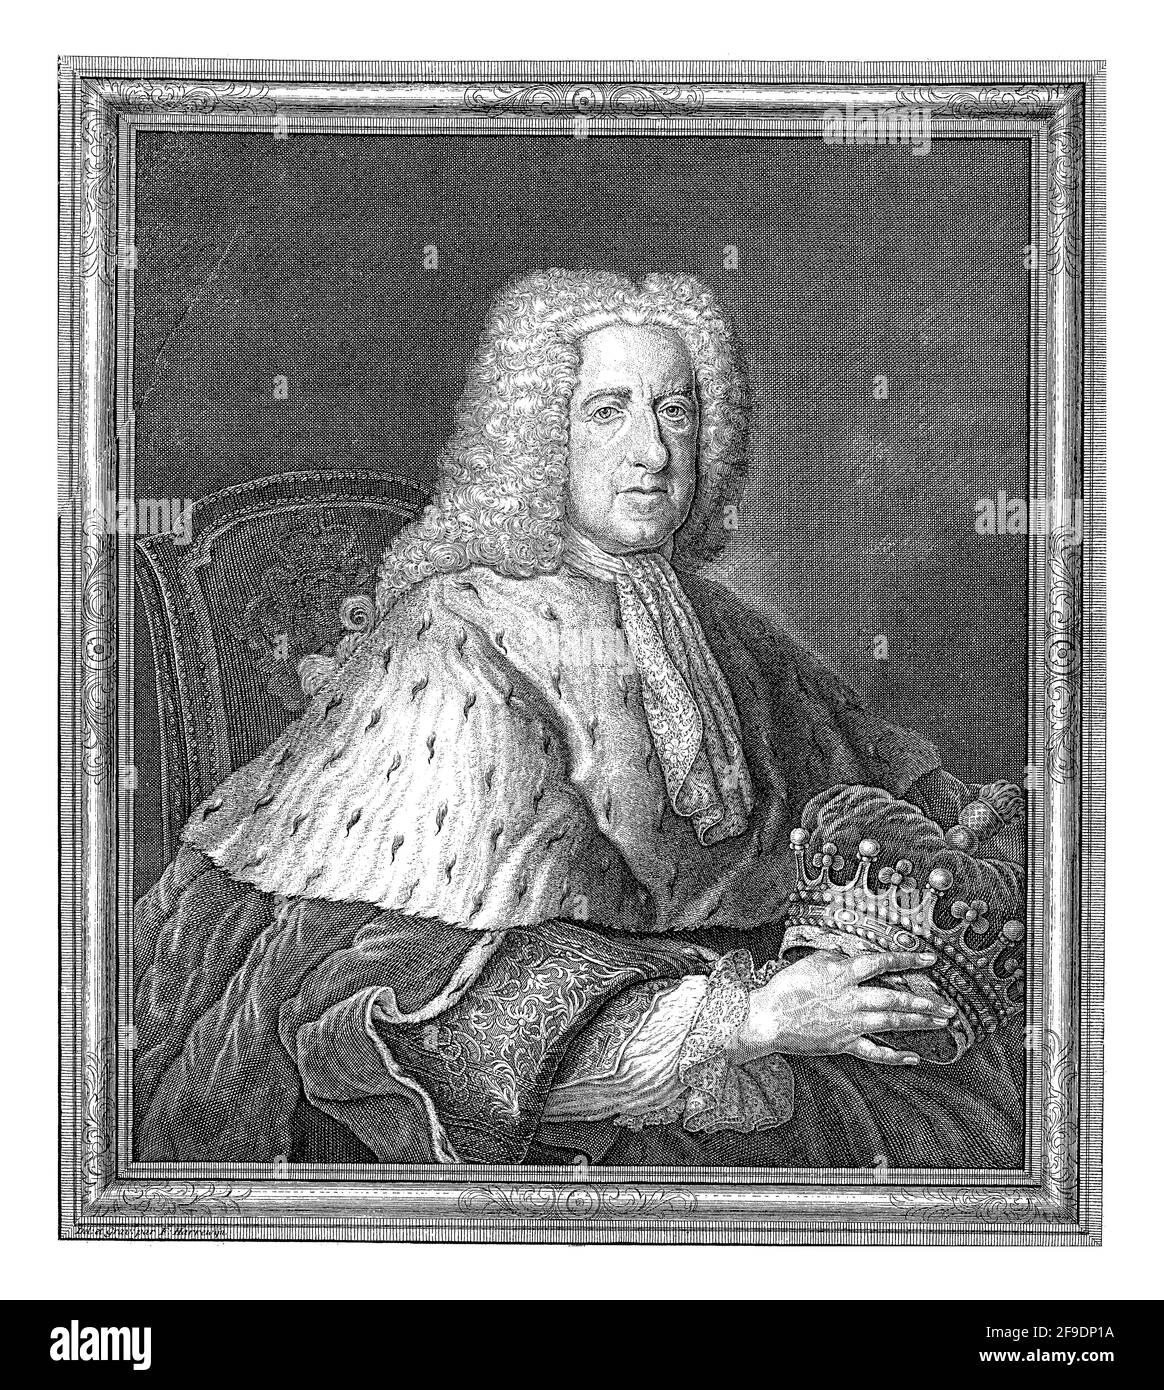 Half-length portrait to the right of Thomas Bruce, Earl of Ailesbury, sitting on a chair and holding a crown. Below the portrait a family crest and a Stock Photo